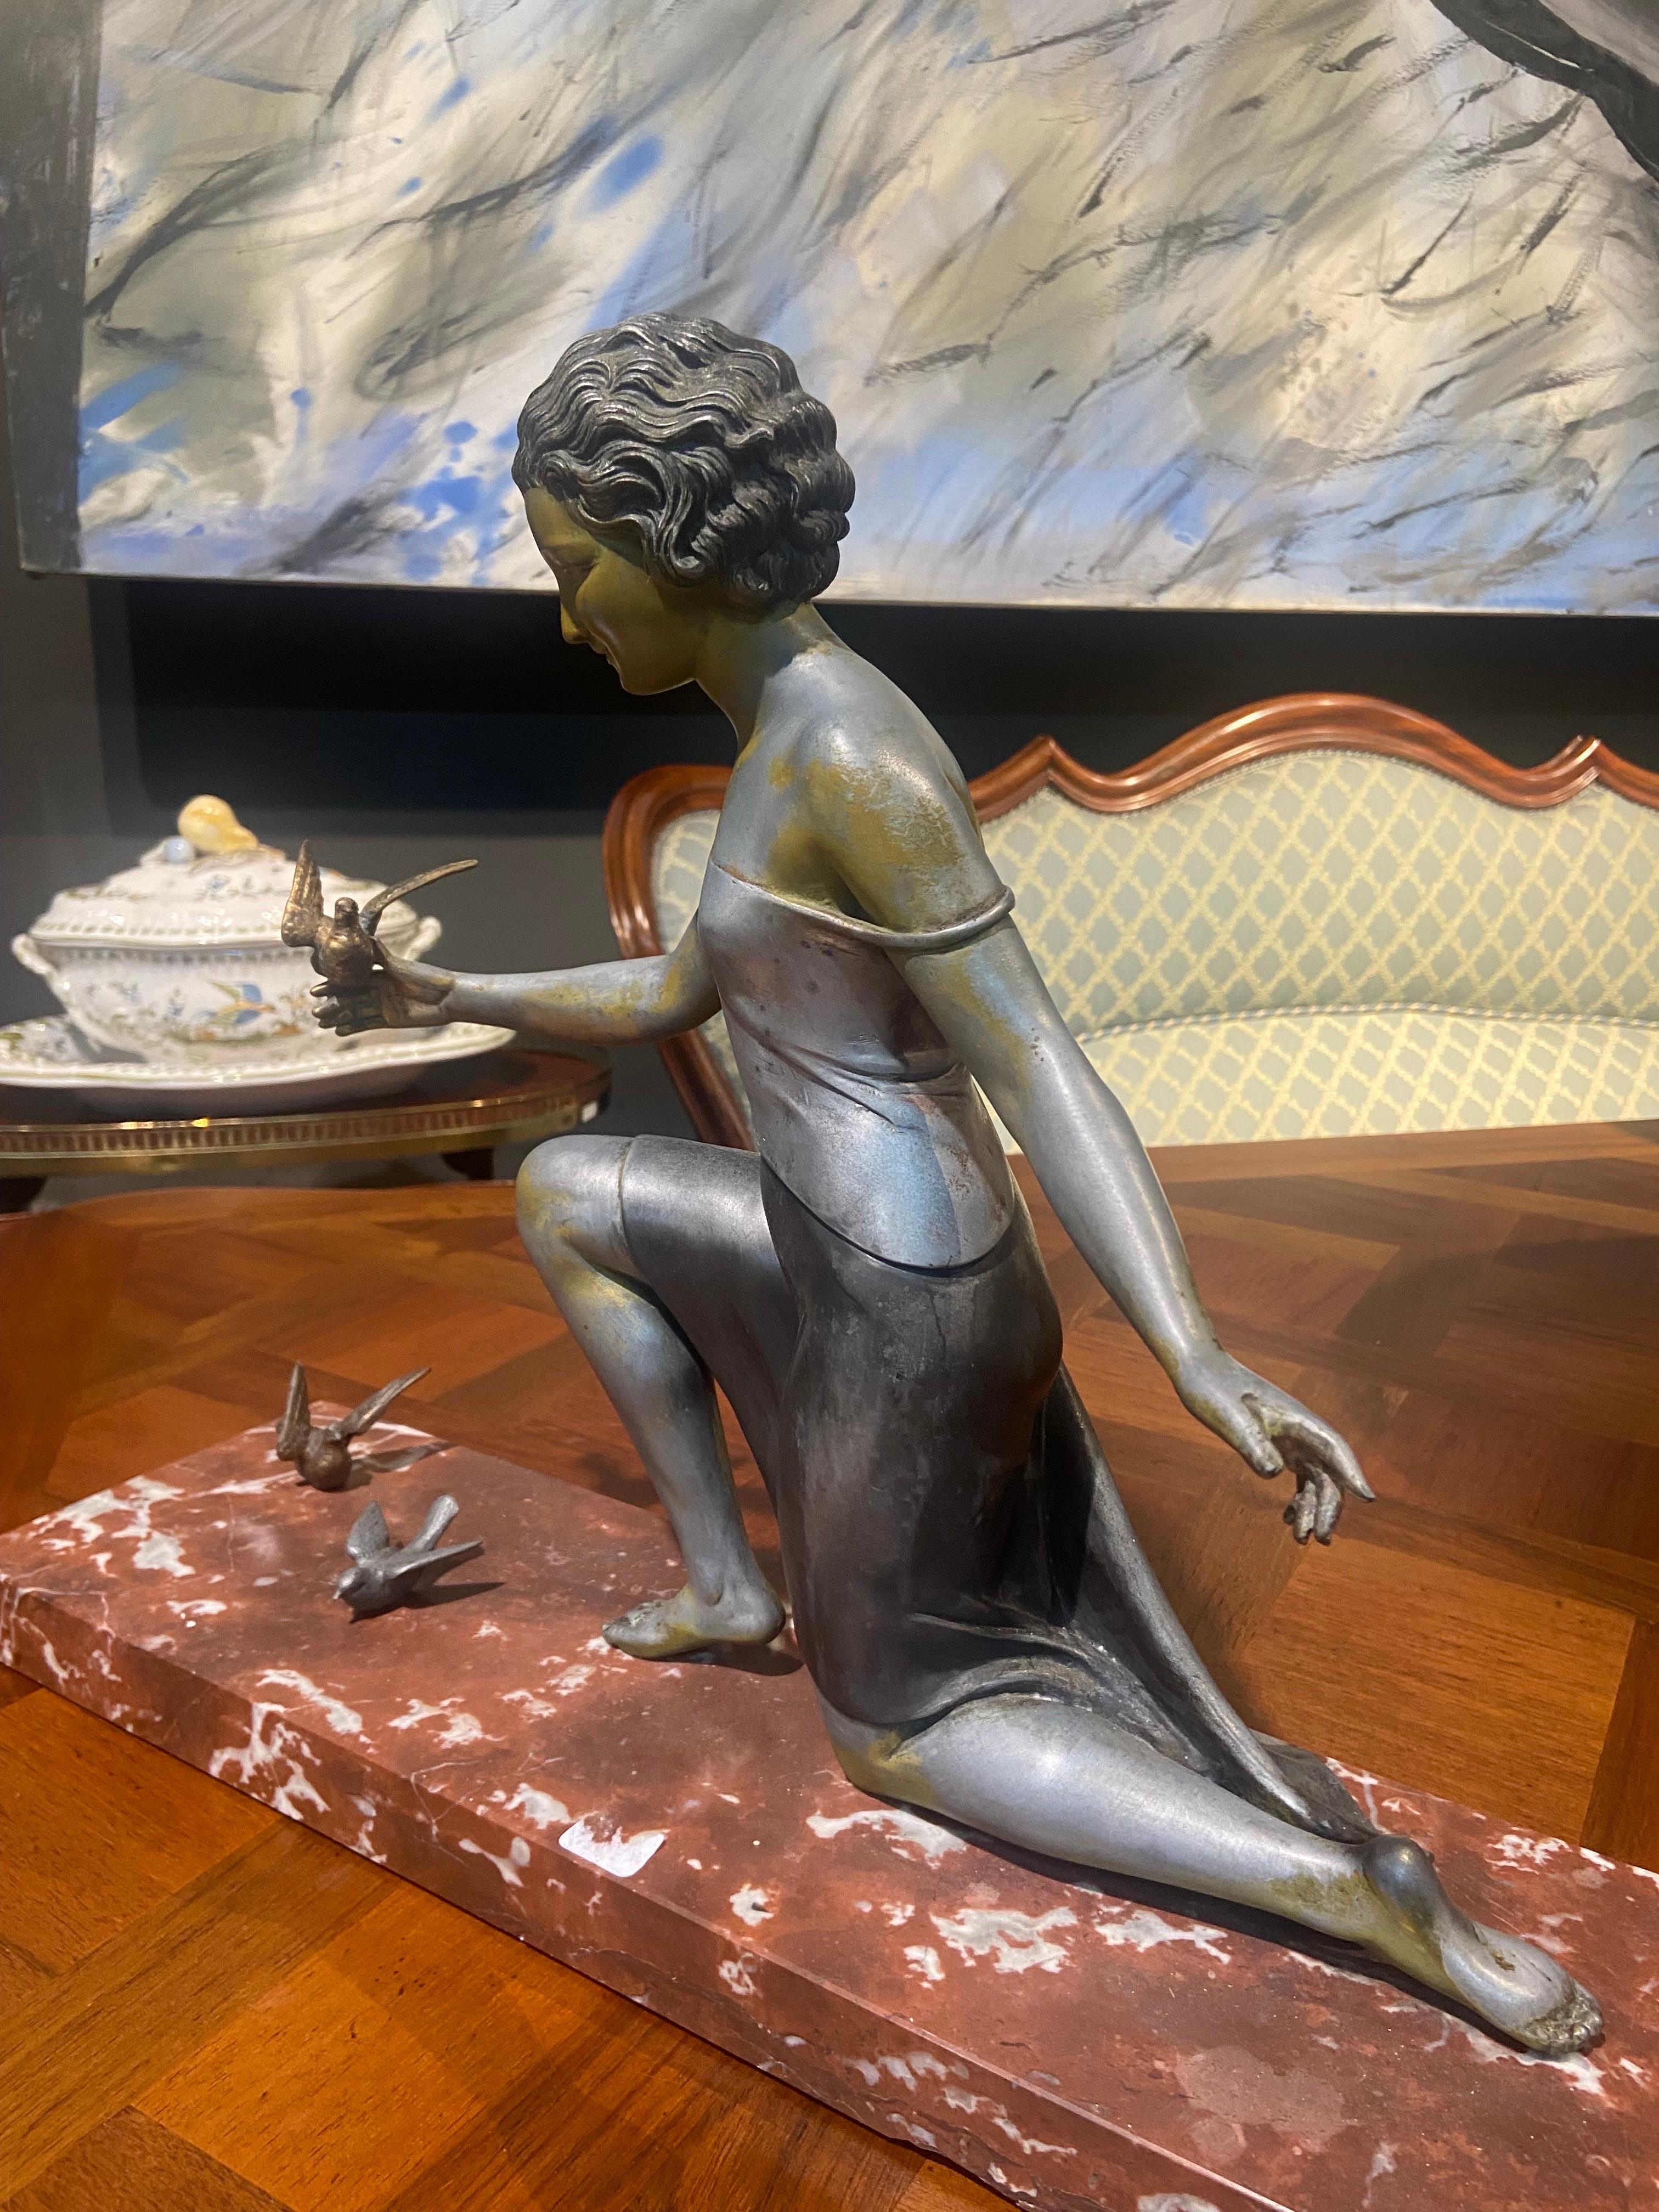 Bronze sculpture on red marble base representing young lady with birds. It was made and signed by the Italian artist Ugo Cipriani who worked in France for a long time. This sculpture was probably made circa 1920-1930, it has clear influences from